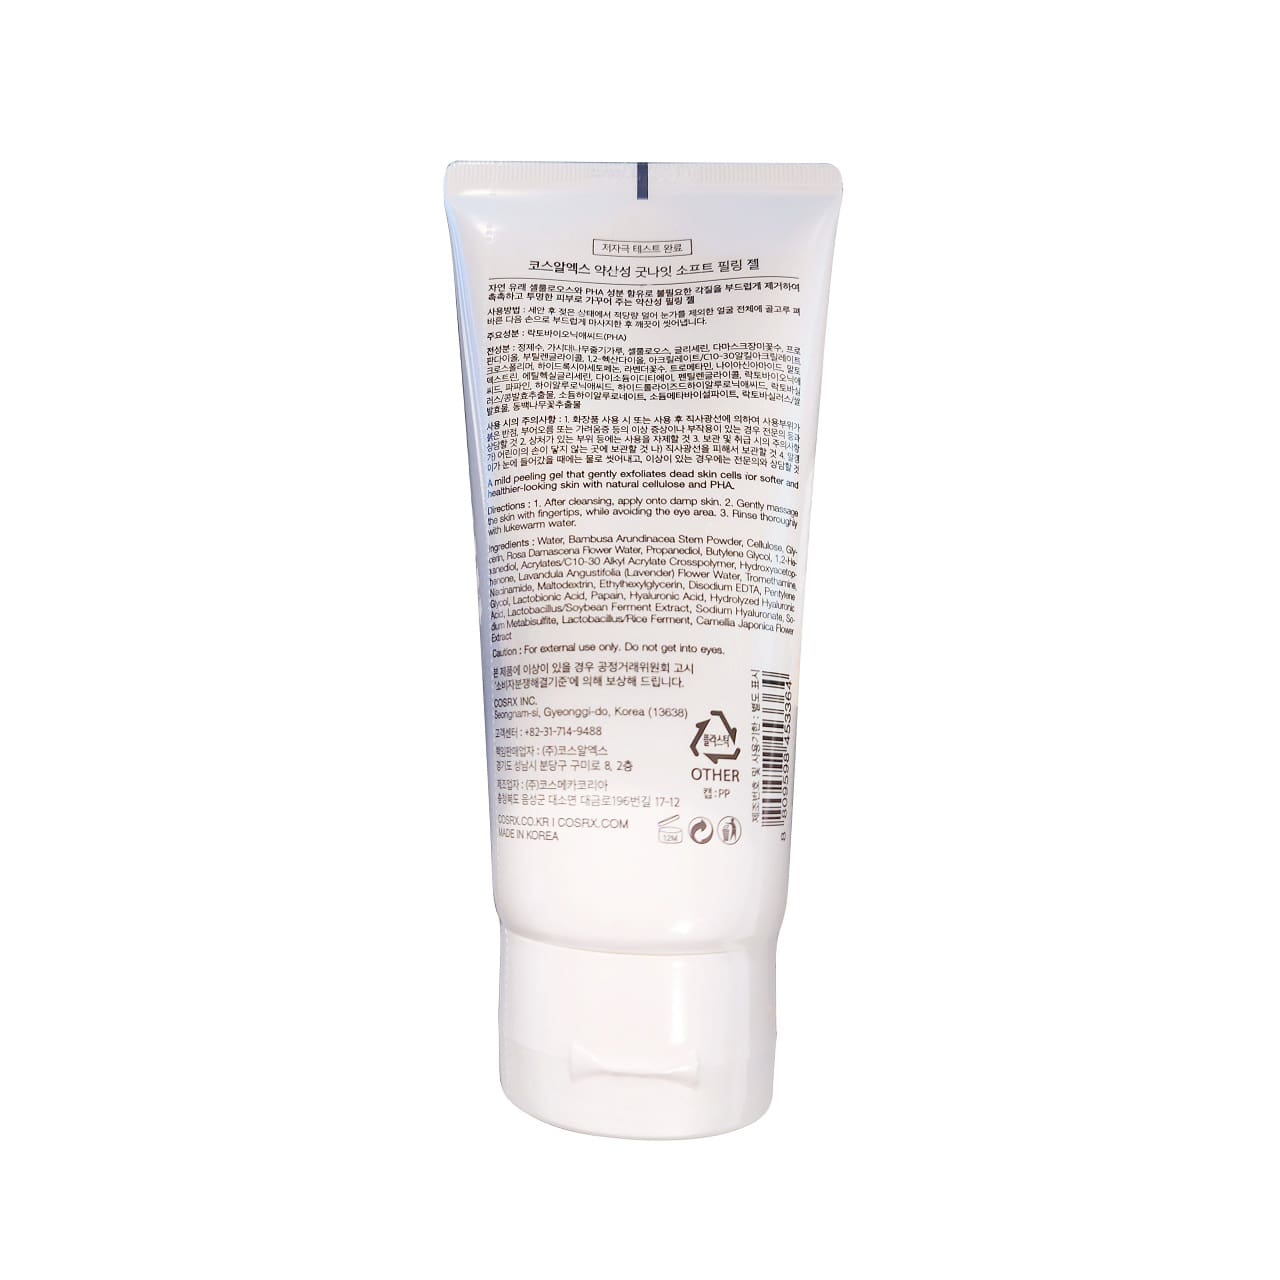 Directions, ingredients, cautions for COSRX Low pH Good Night Soft Peeling Gel (120 mL)